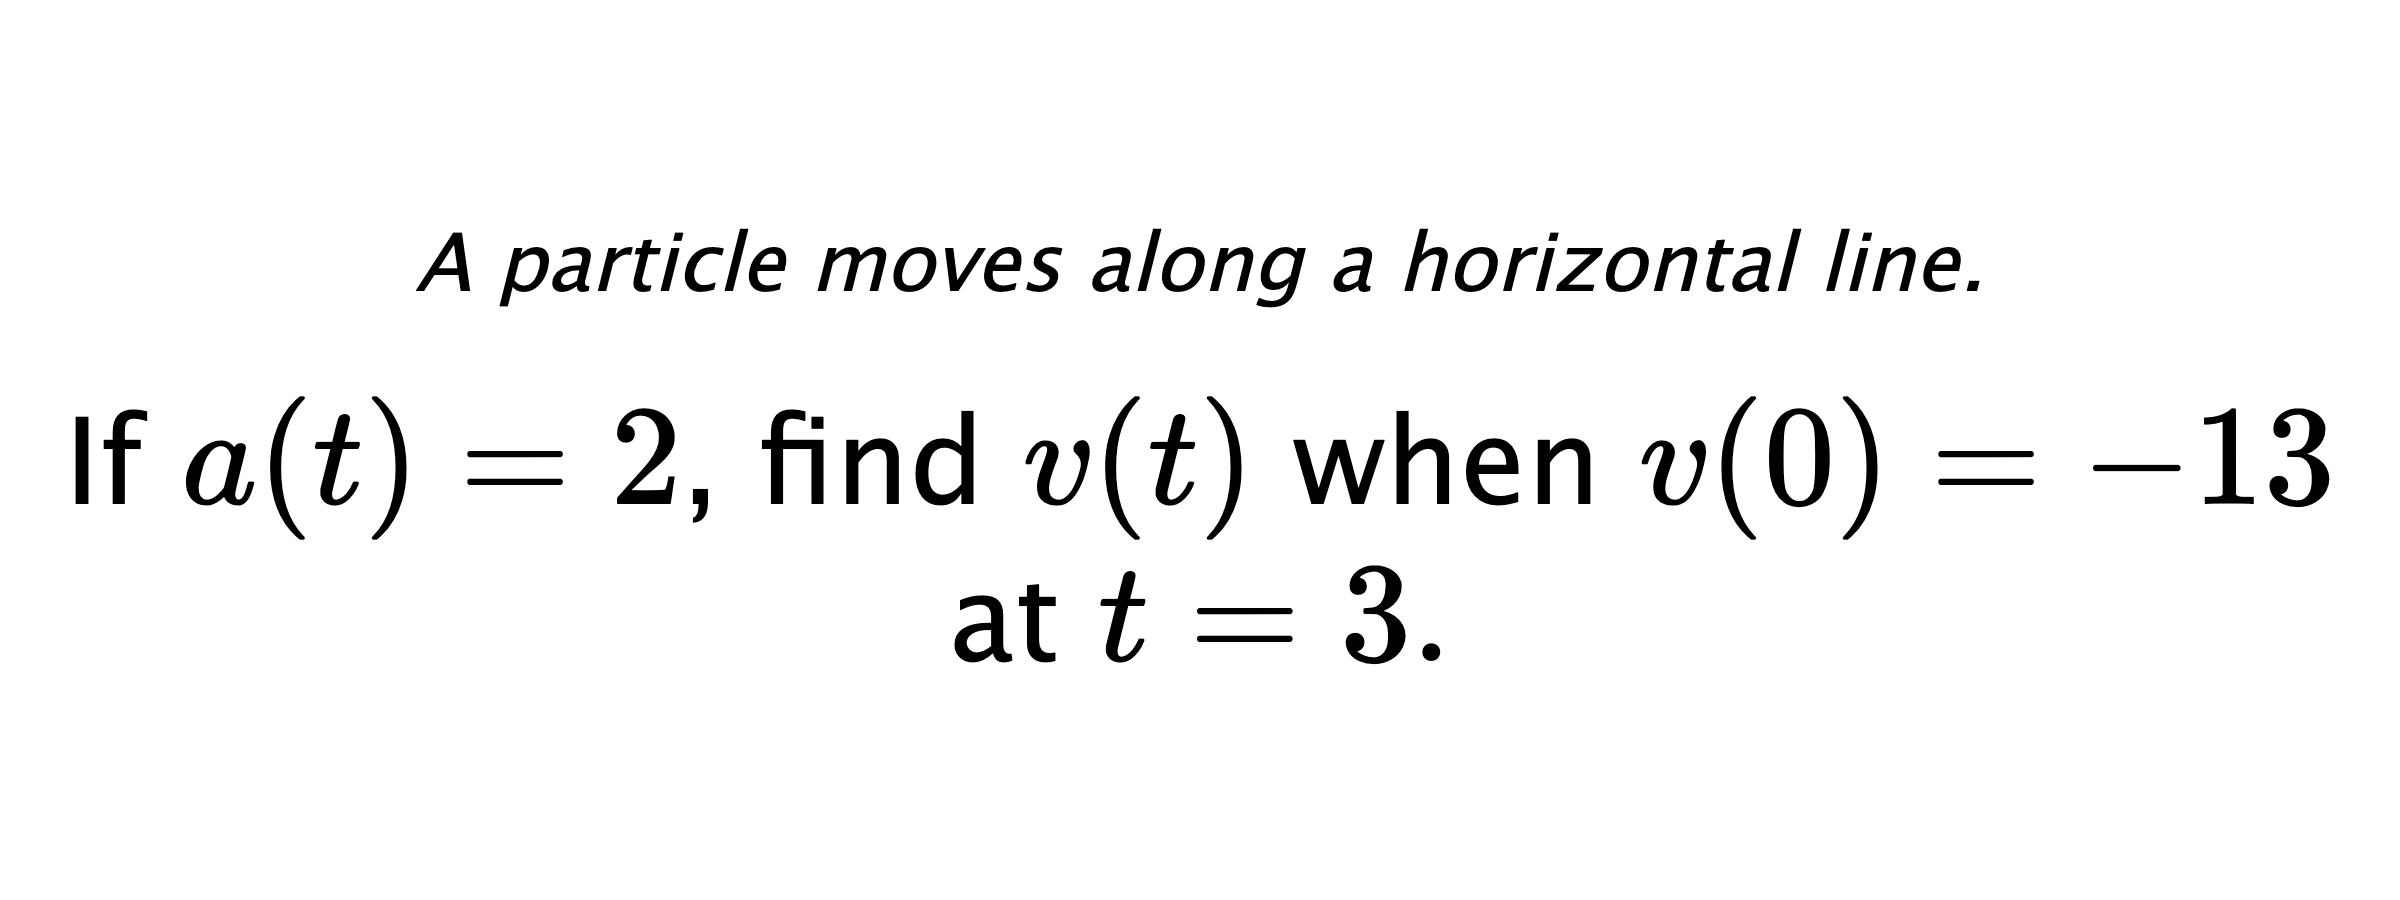 A particle moves along a horizontal line. If $ a(t)=2 $, find $ v(t) $ when $ v(0)=-13 $ at $ t=3 .$